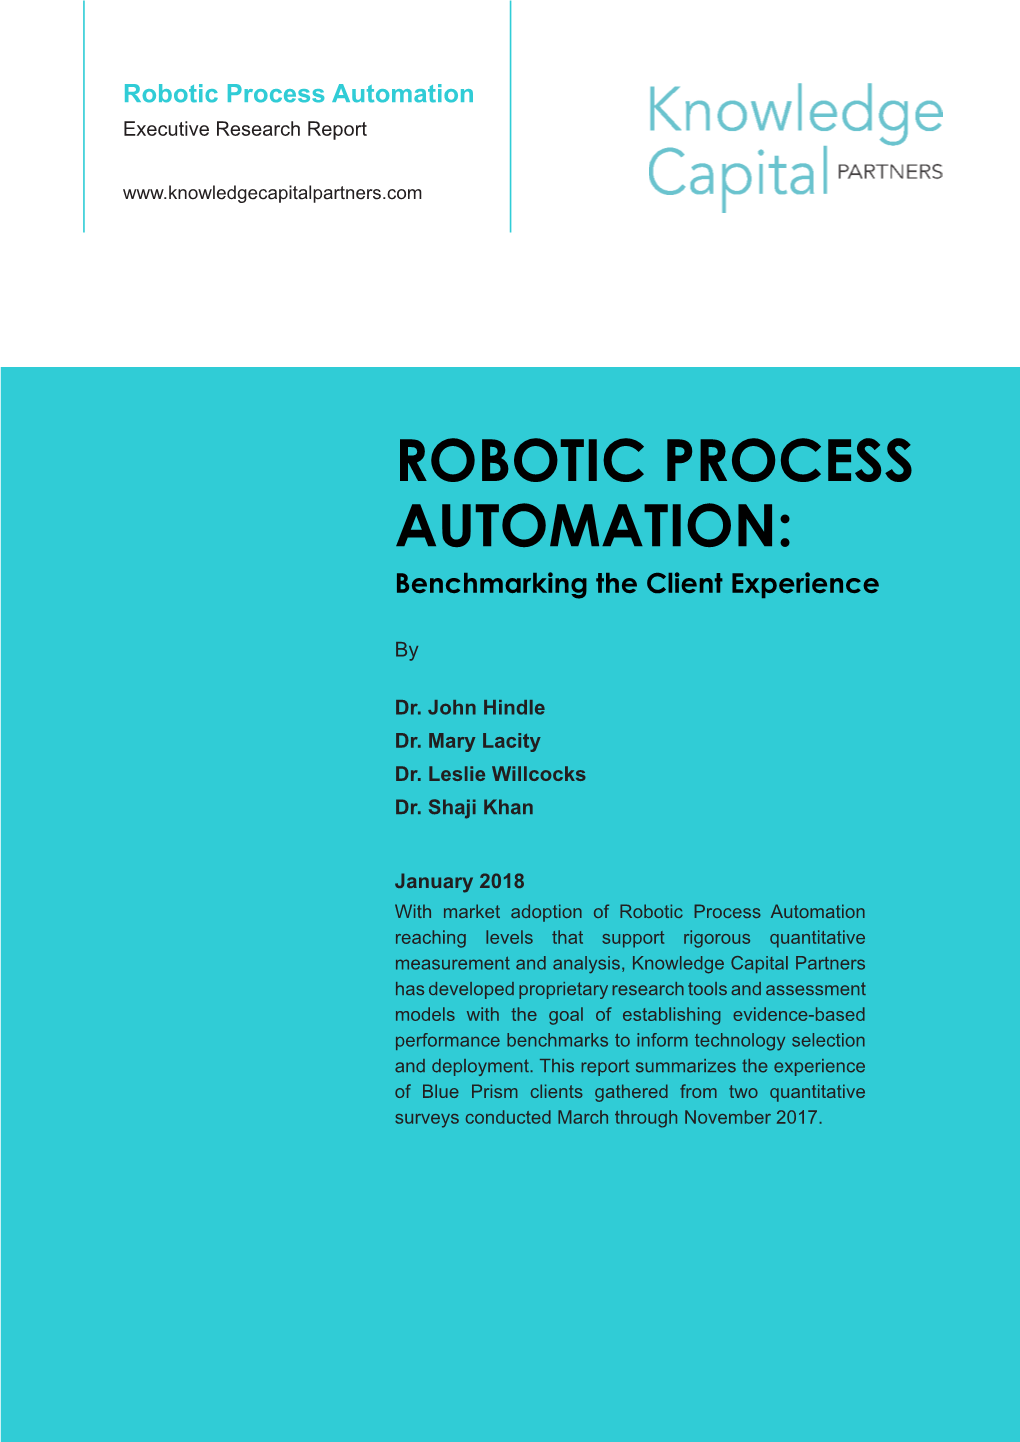 ROBOTIC PROCESS AUTOMATION: Benchmarking the Client Experience